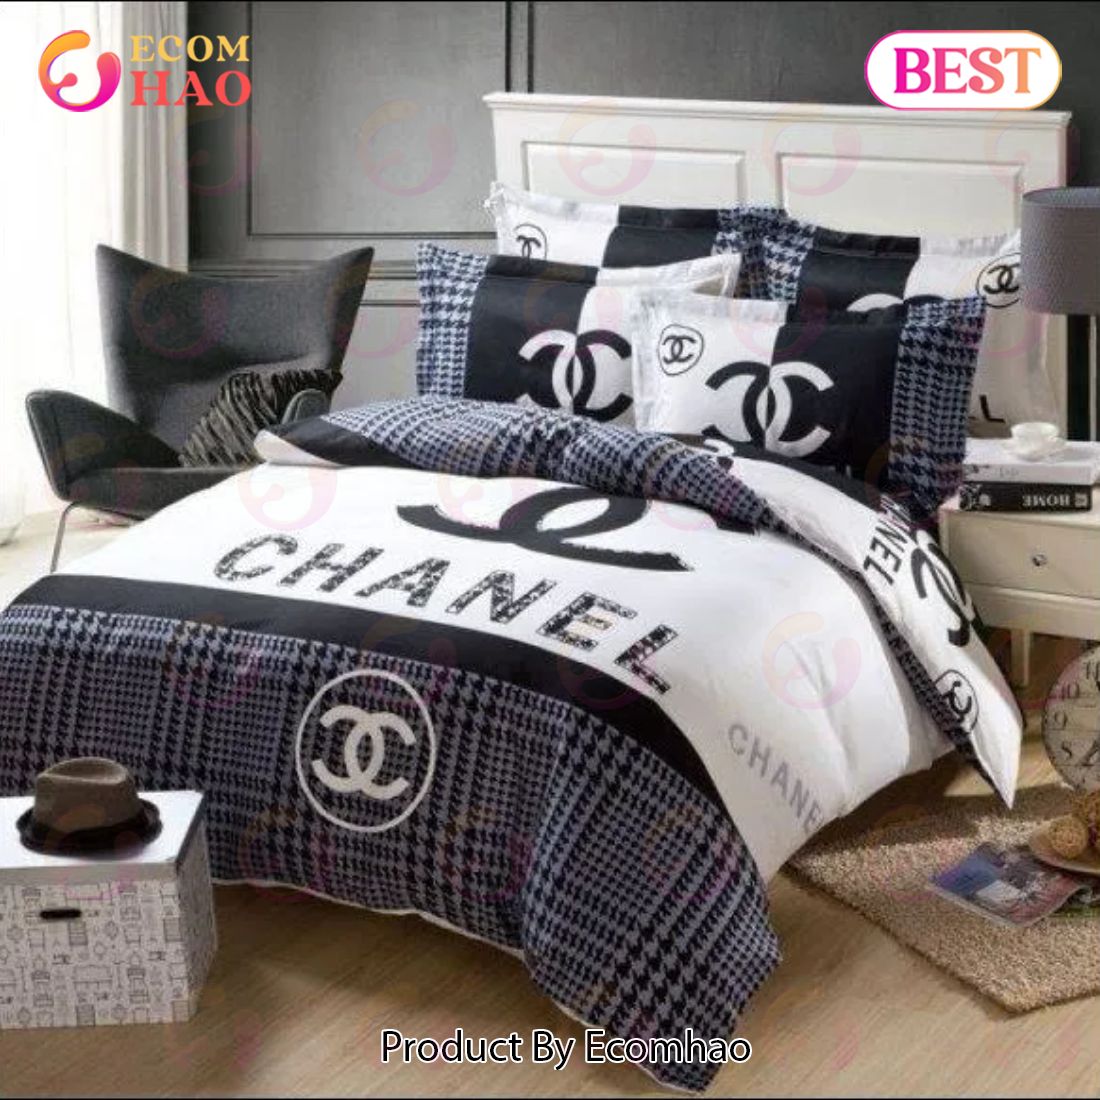 Chanel Luxury Brand Bedding Sets Bedspread Duvet Cover Set Bedroom Decor Thanksgiving Decorations For Home Best Luxury Bed Sets Gift Thankgivings And Christmas